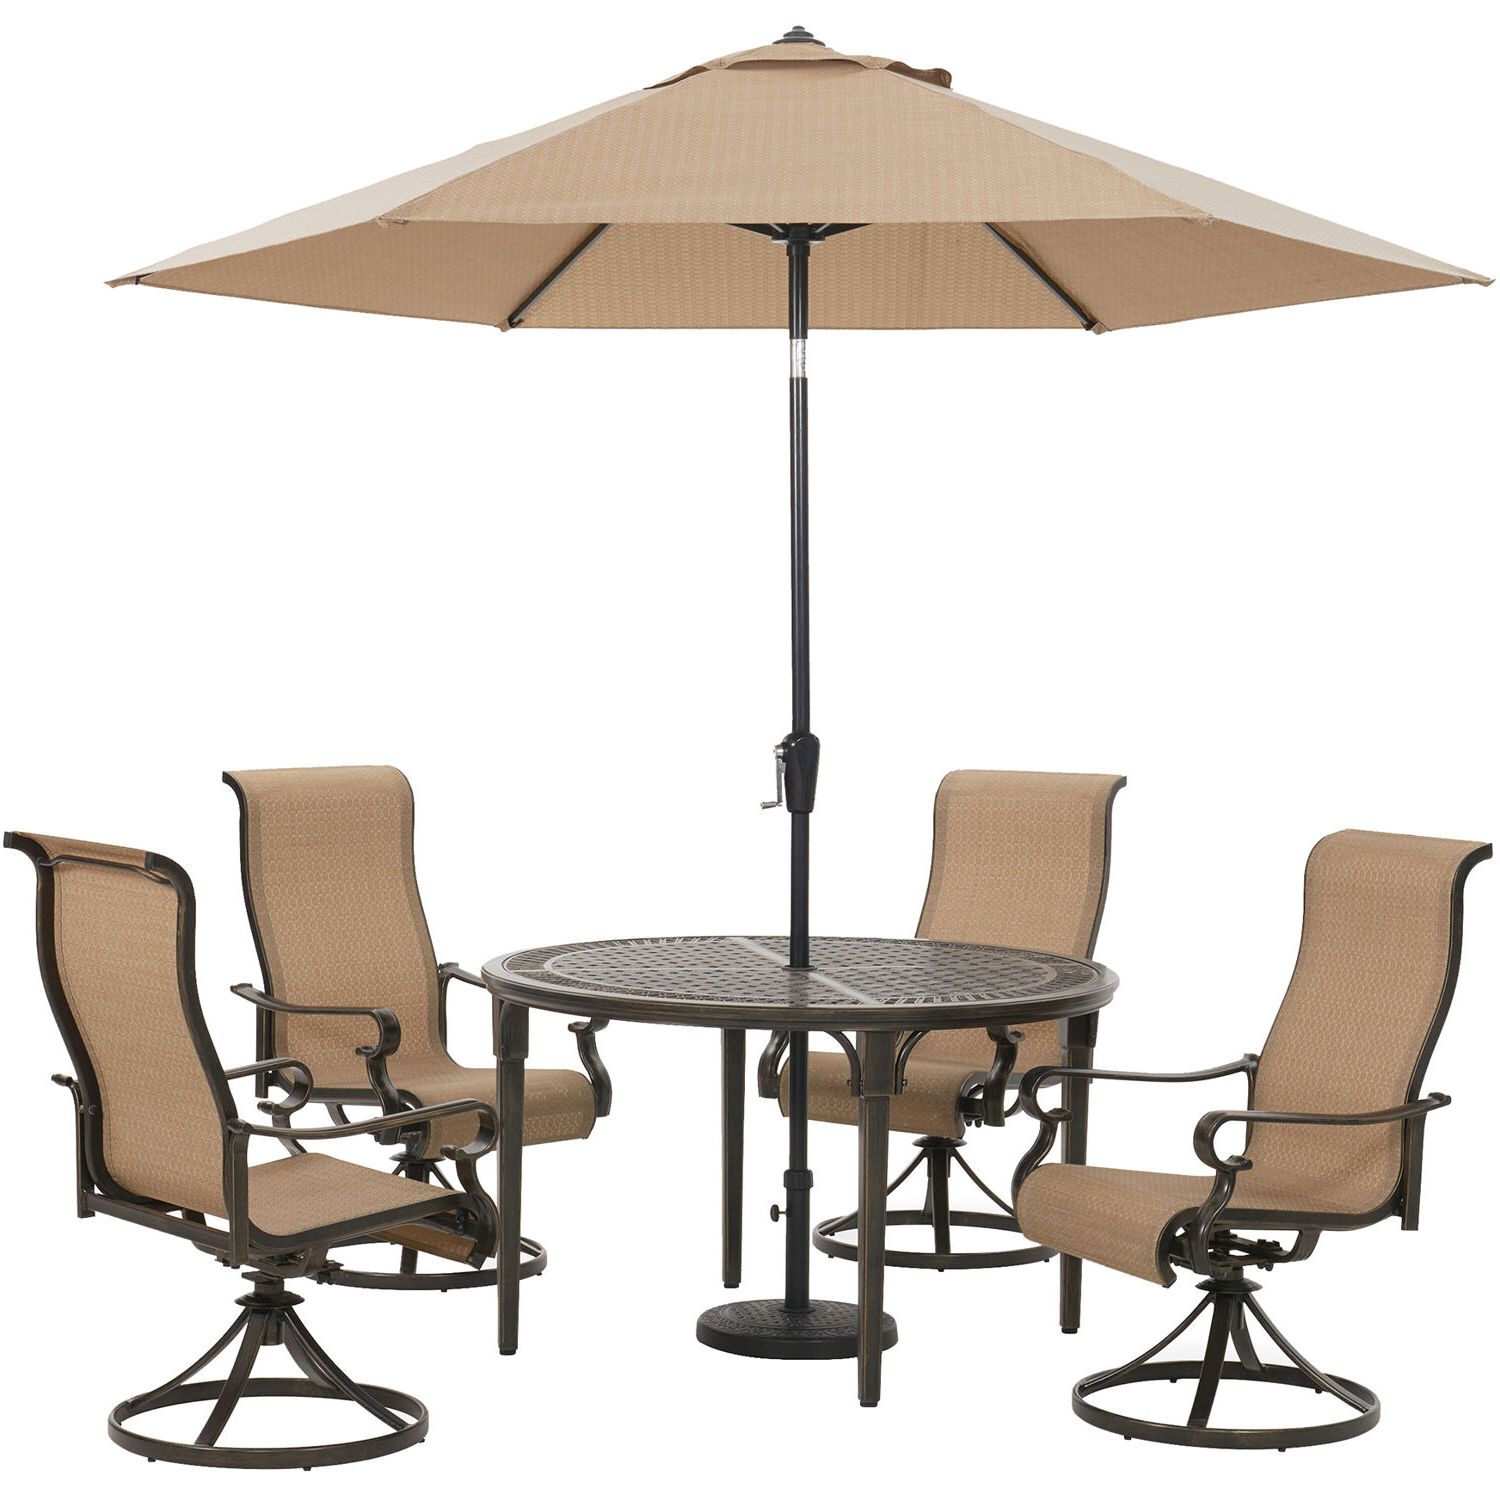 5 Piece Round Patio Dining Sets Within Newest Hanover Brigantine 5 Piece Outdoor Dining Set With 4 Sling Swivel (View 7 of 15)